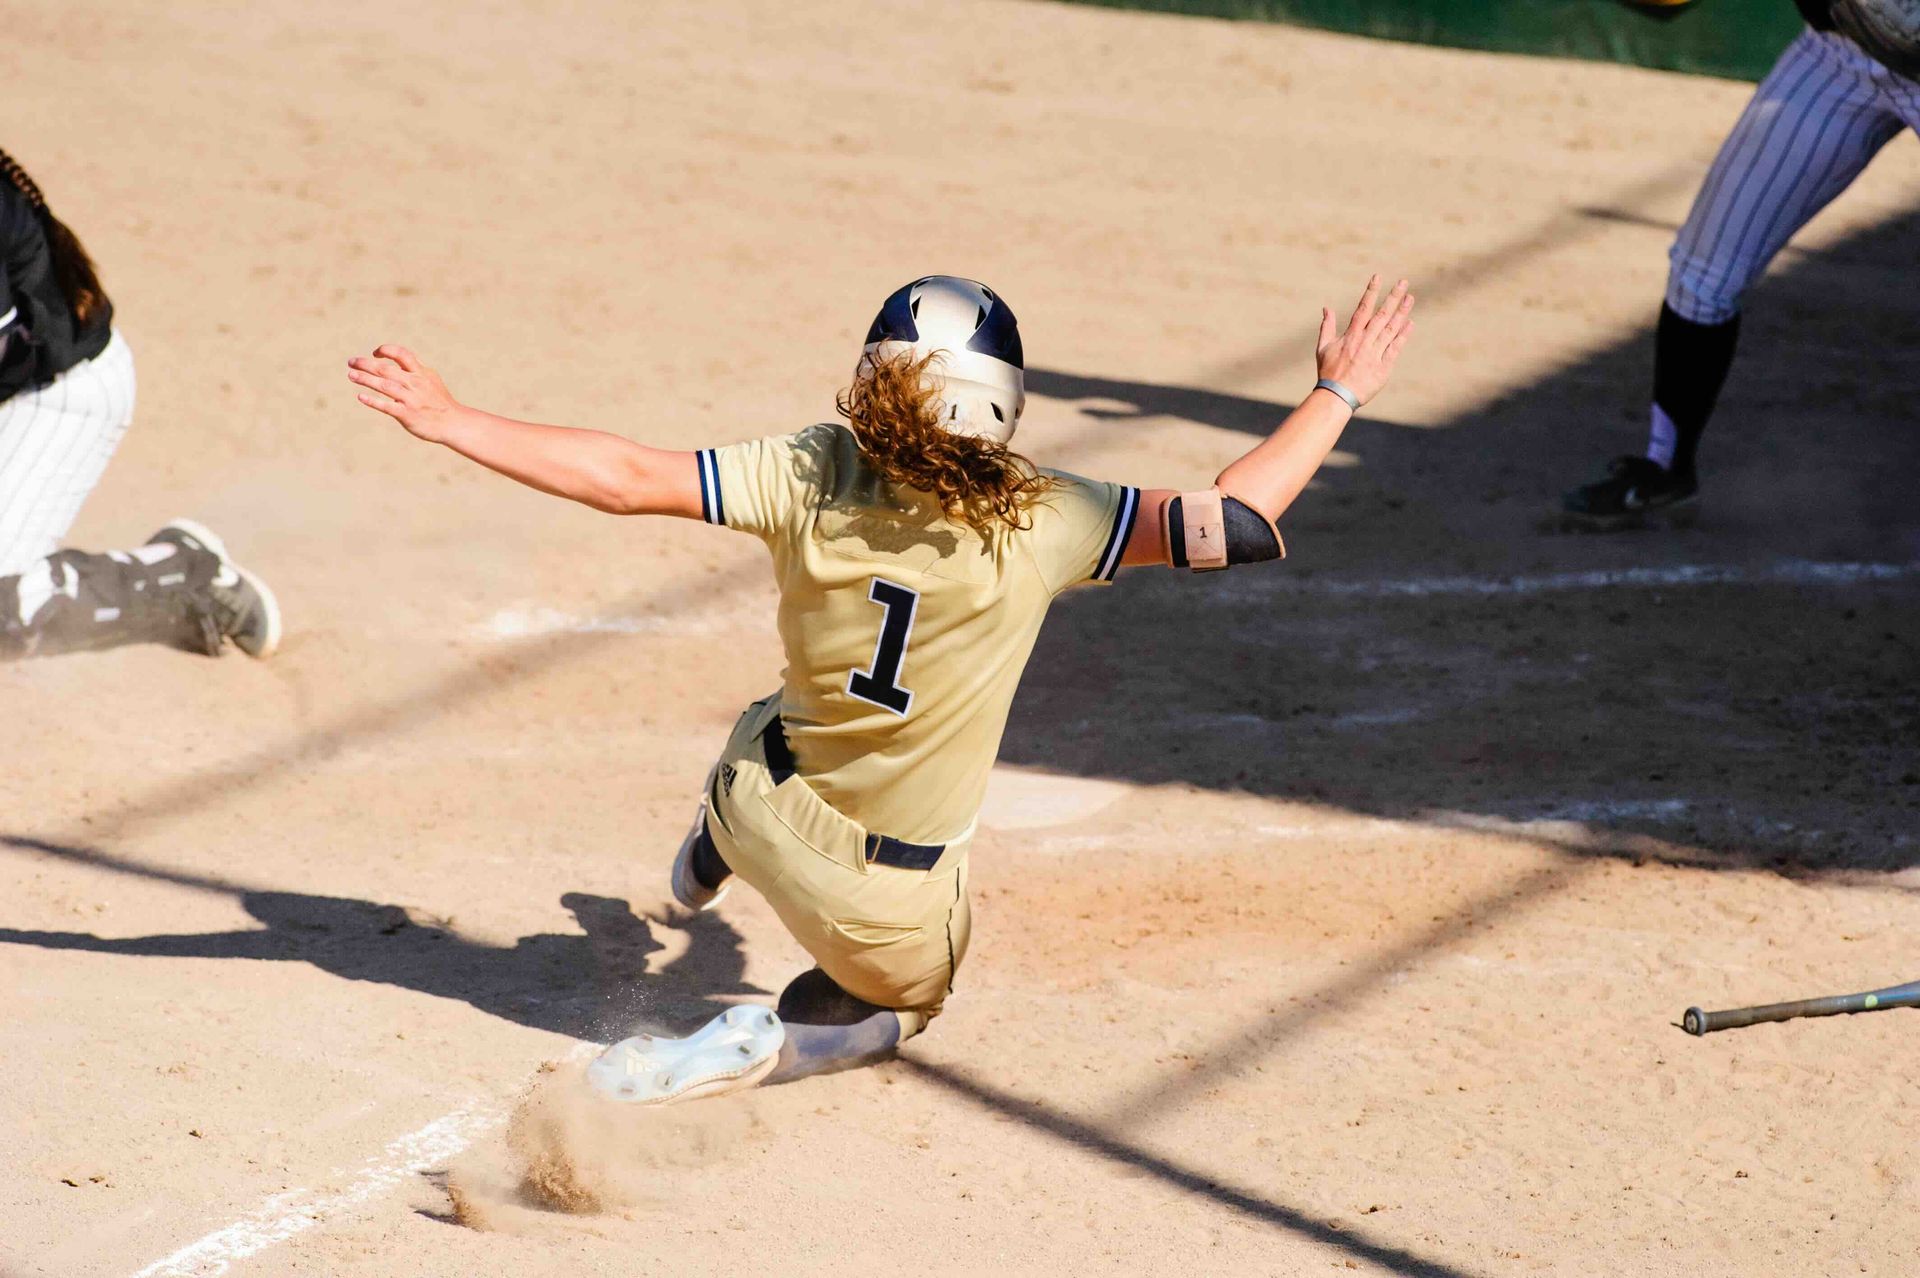 A woman is sliding into home plate during a softball game.